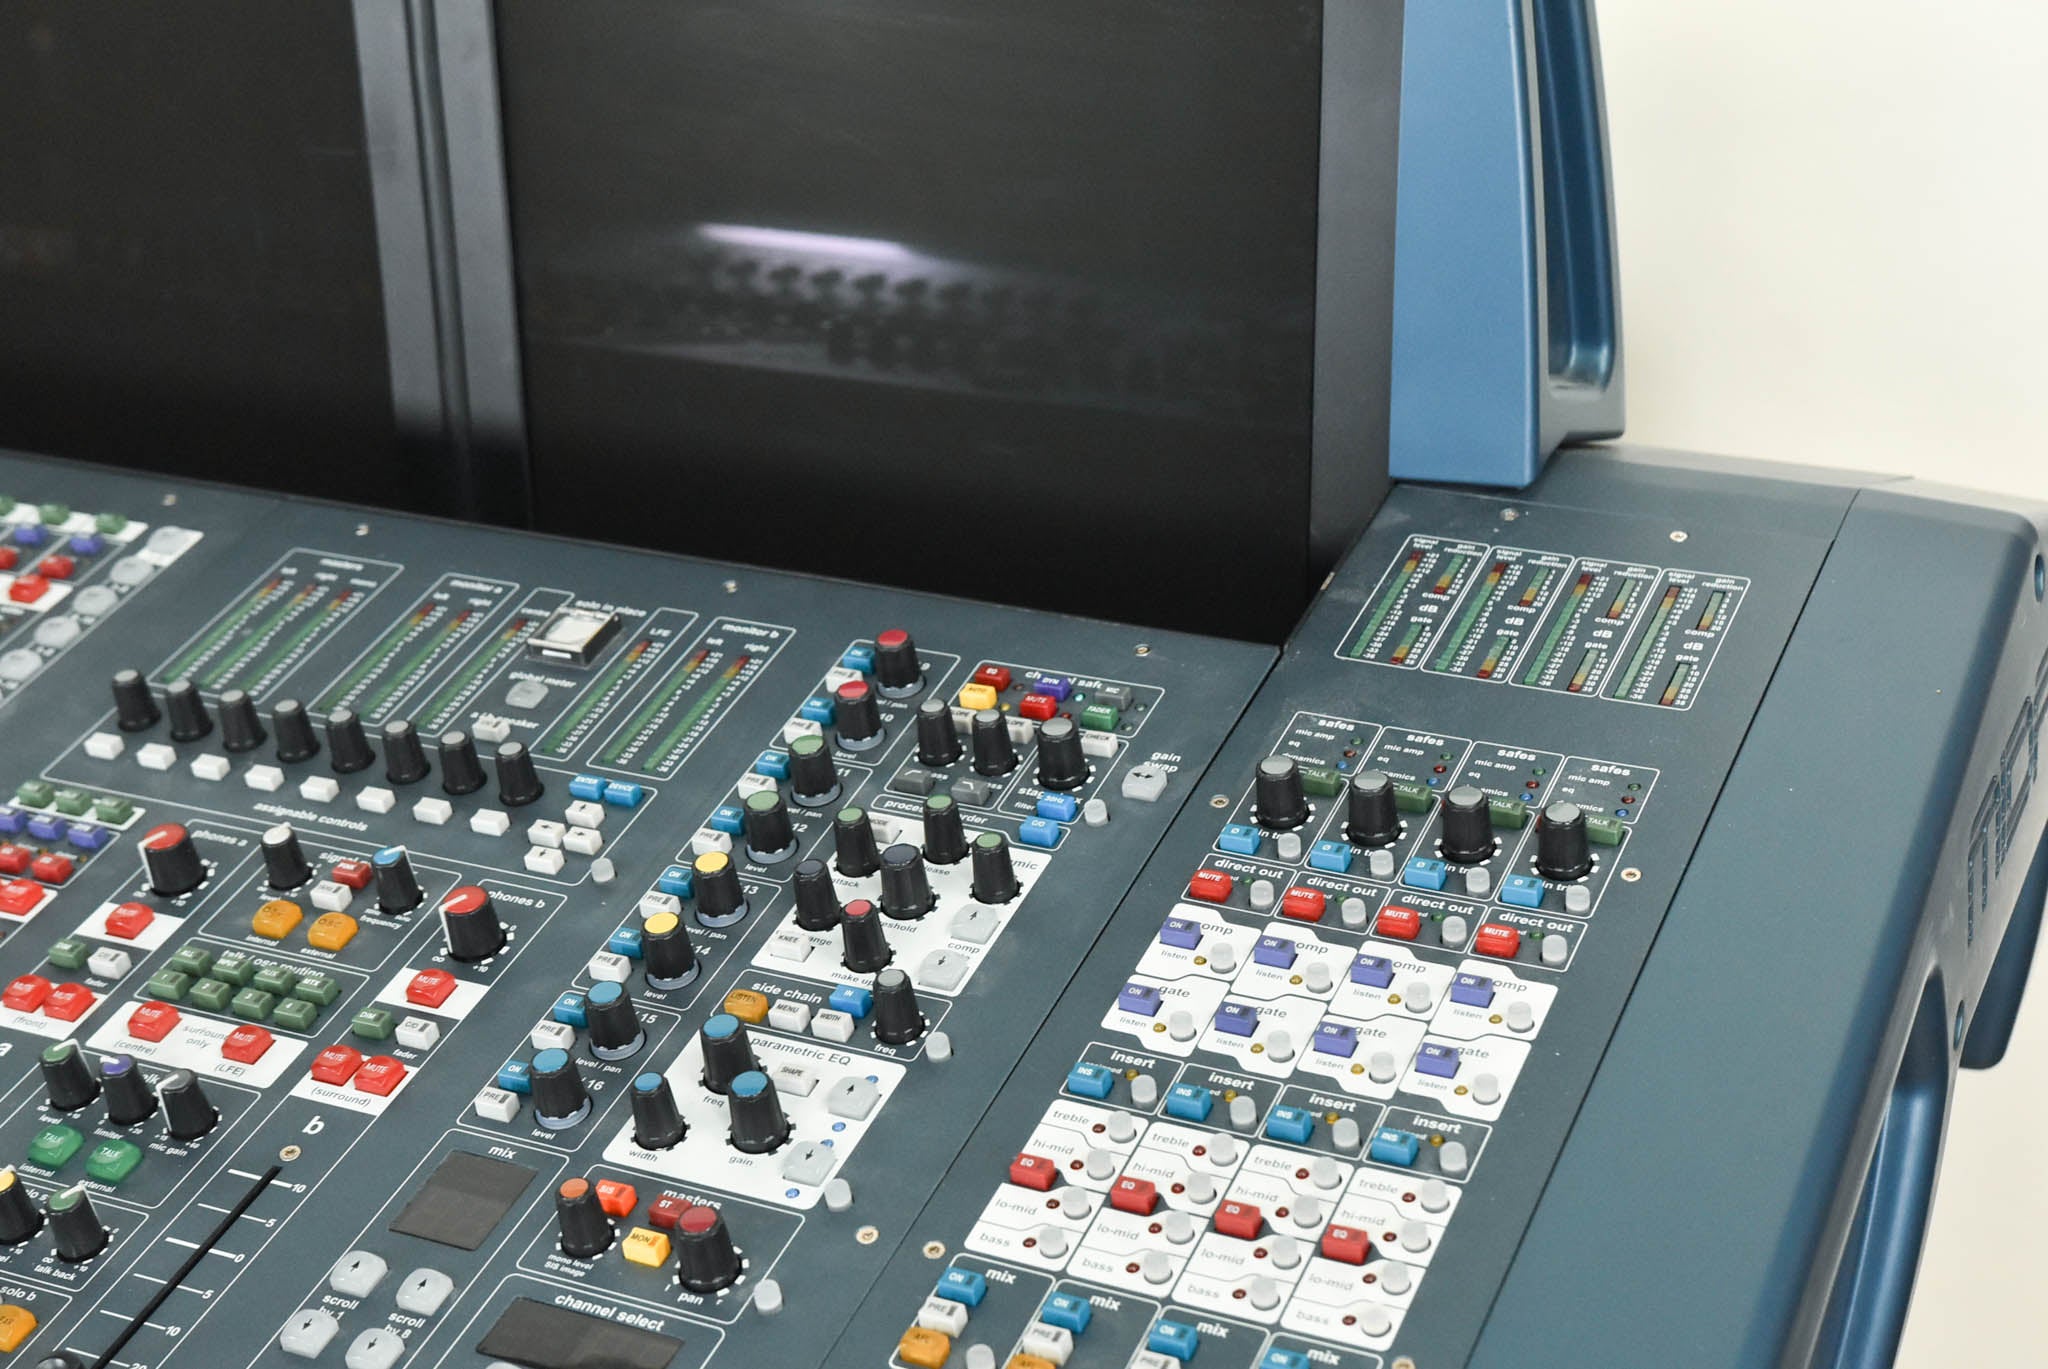 Midas PRO3 Live Digital Audio Mixing Console with DL371 Engine